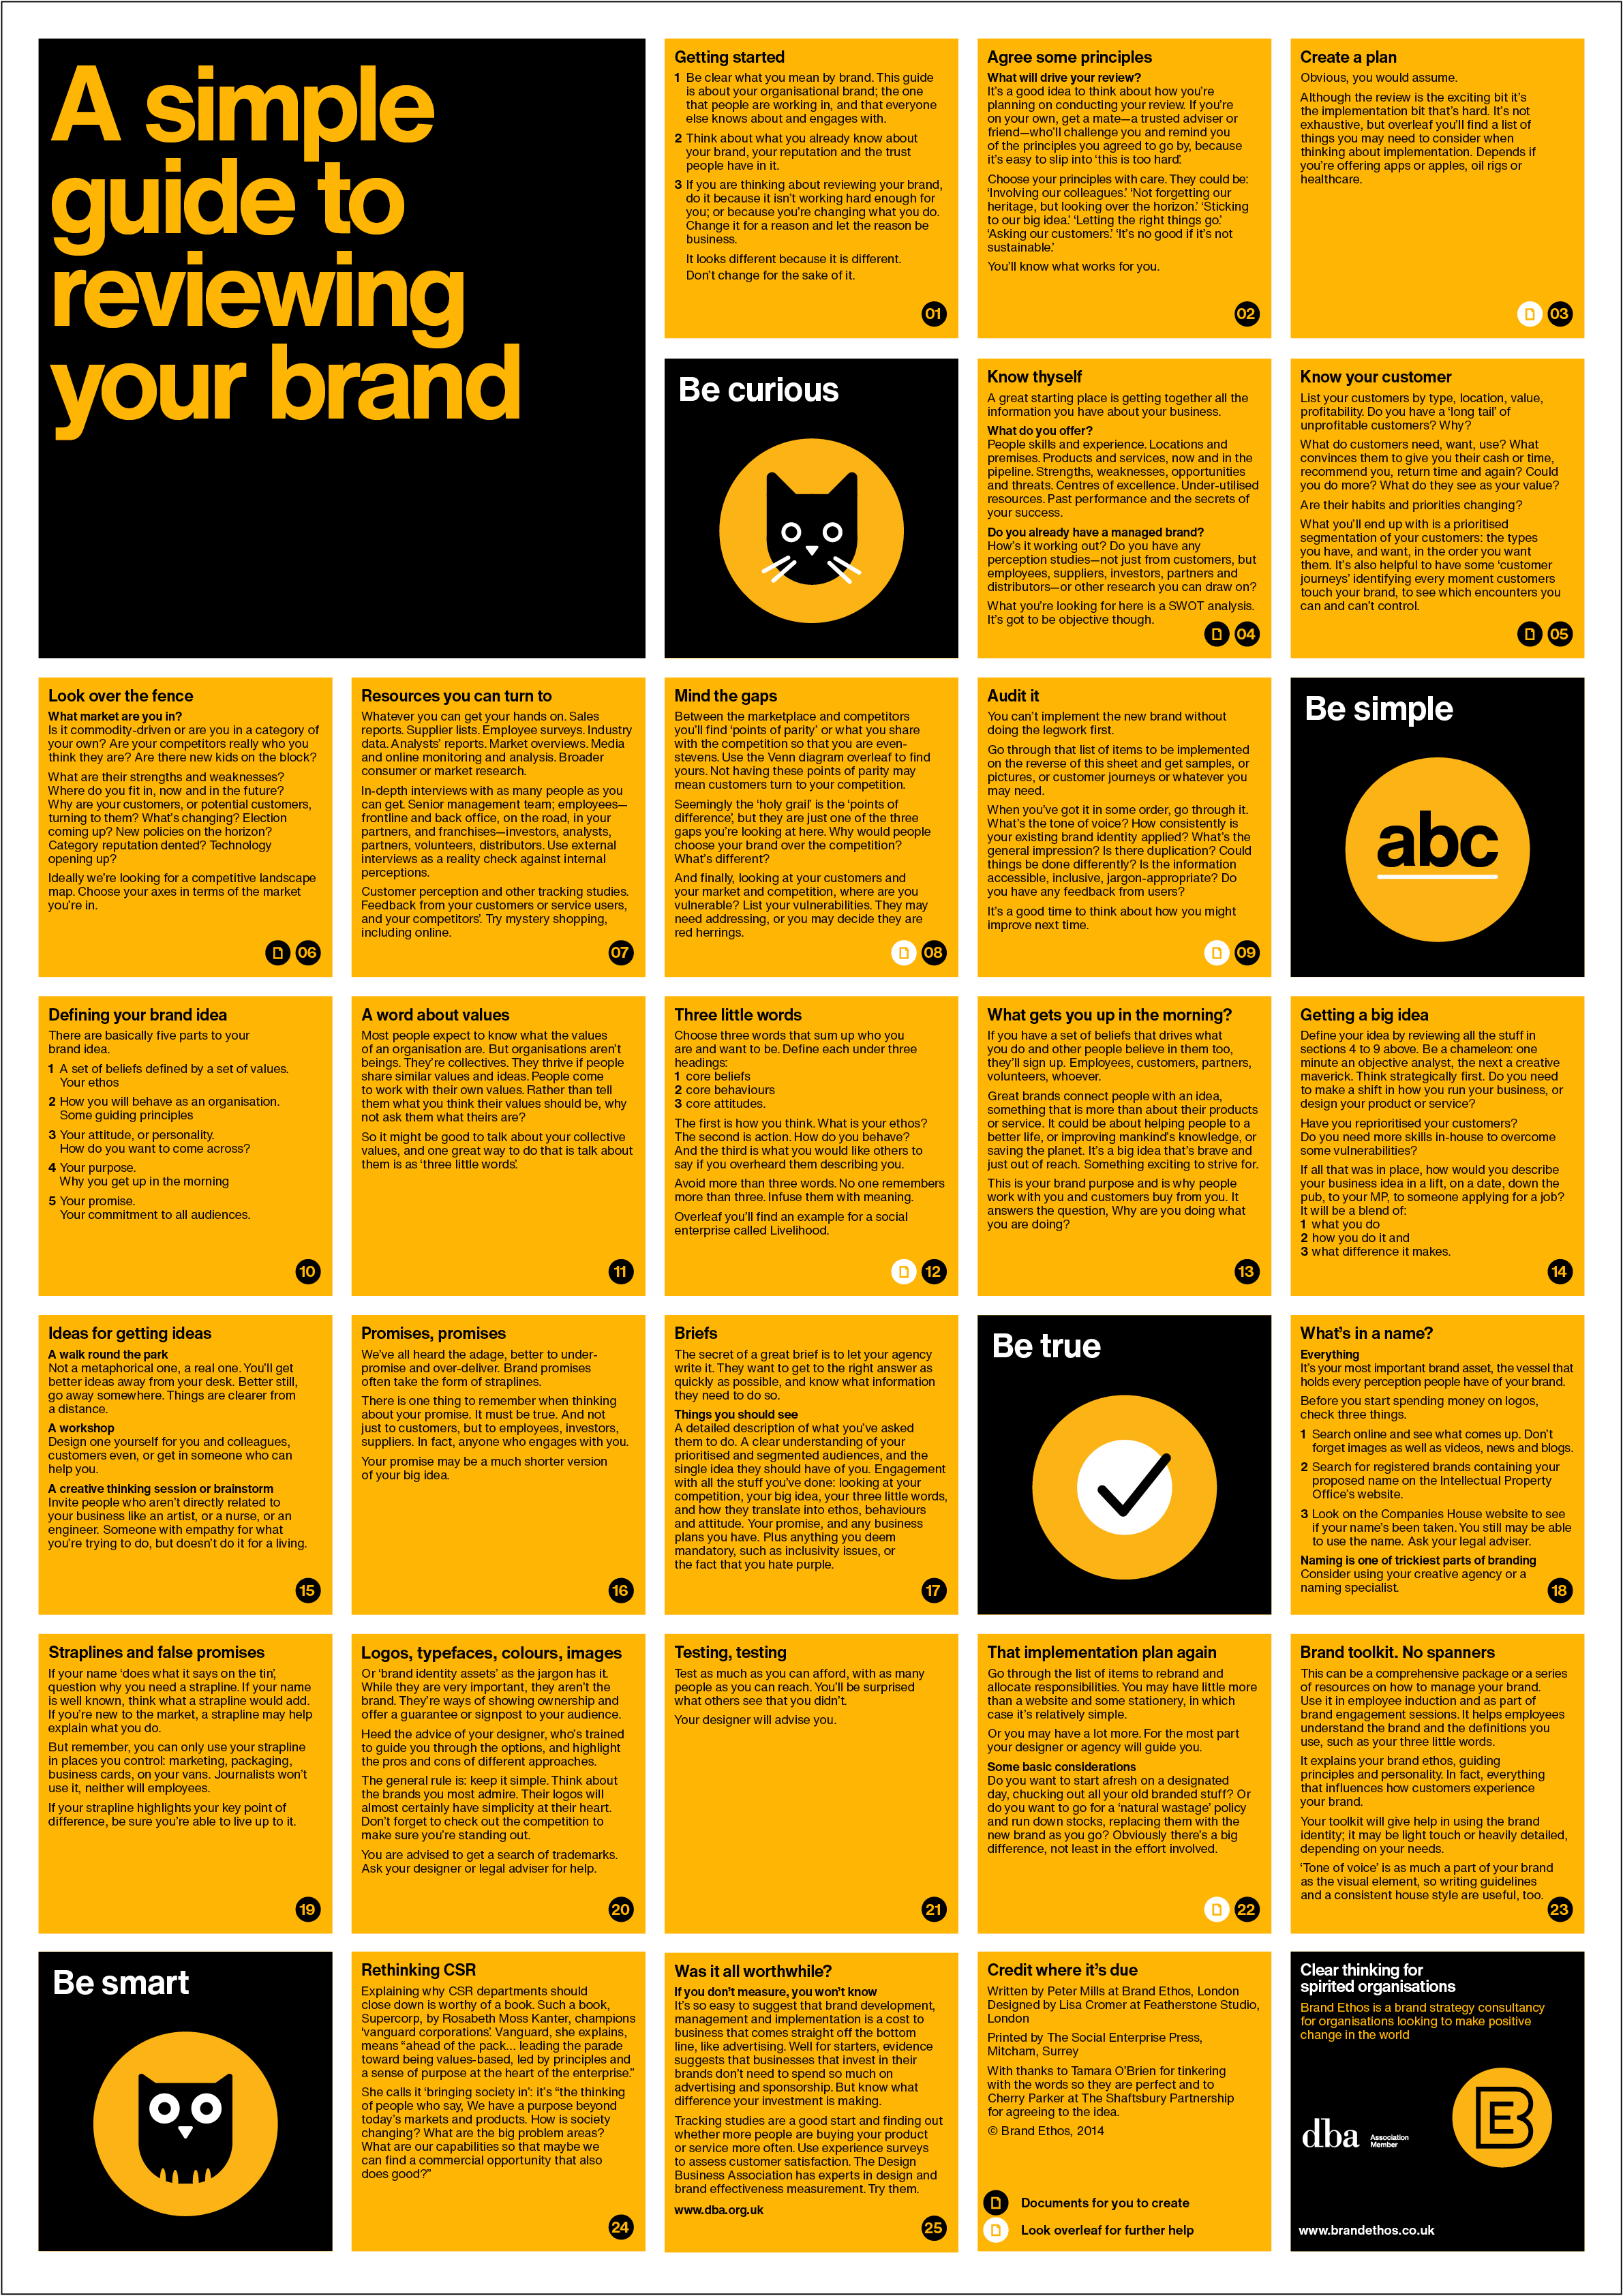 A simple guide to reviewing your brand